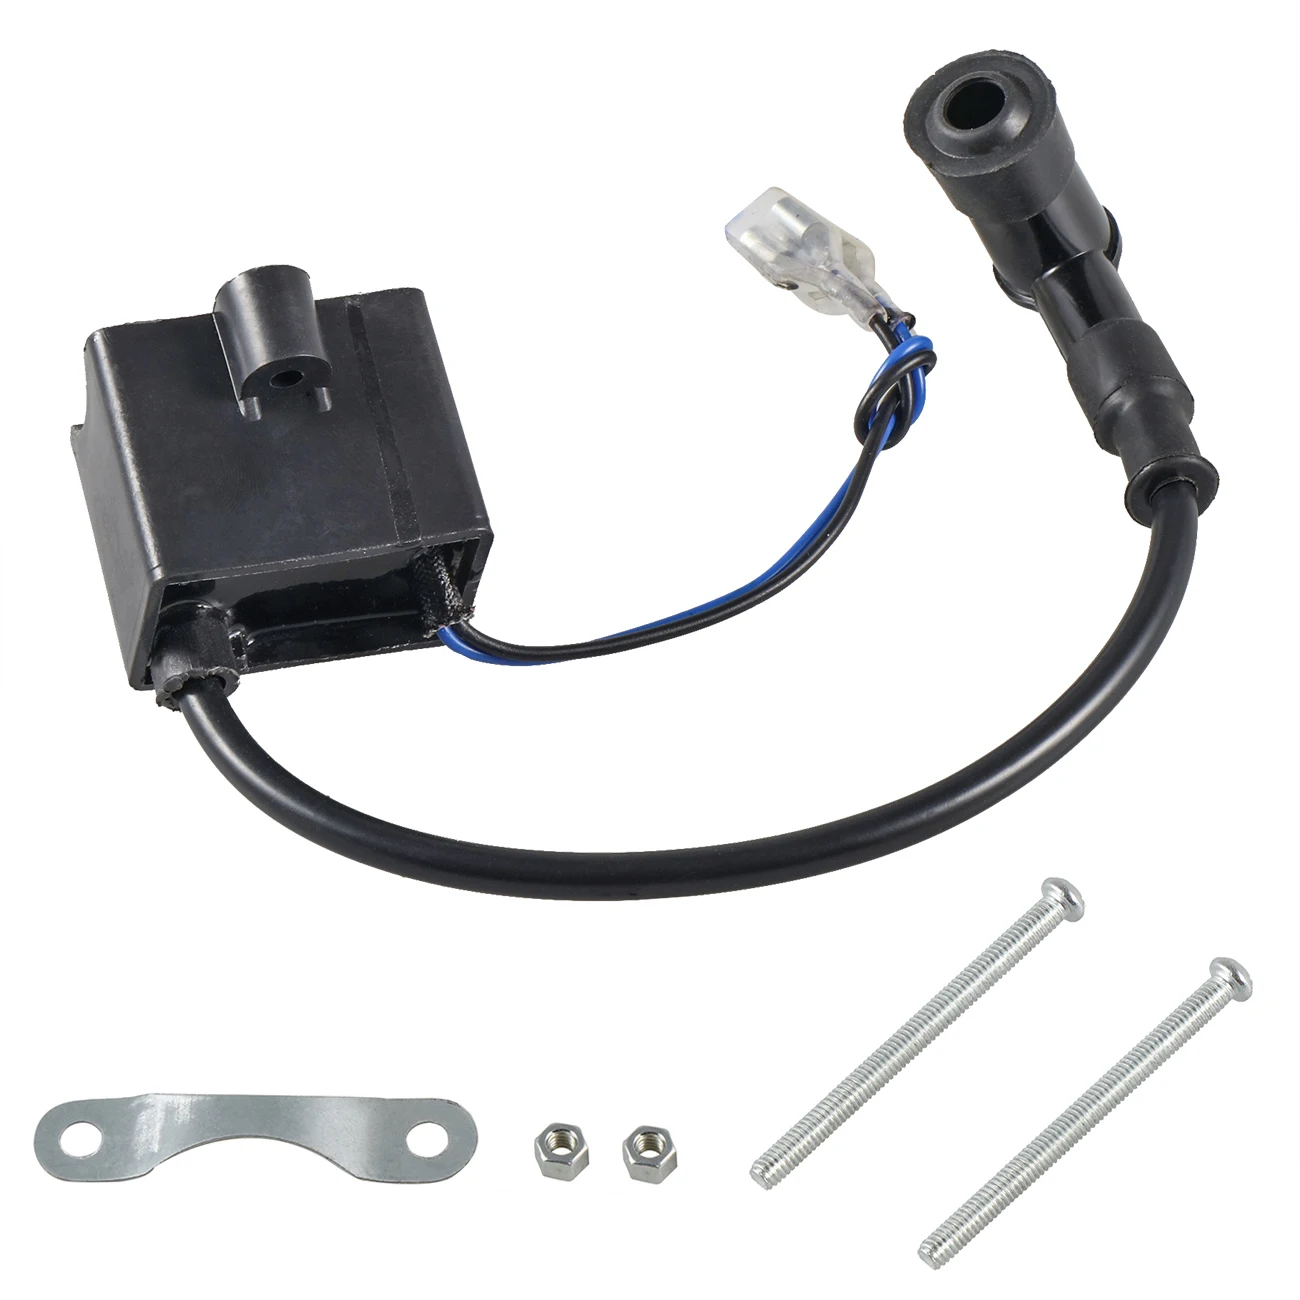 Details about   Black Chain Tensioner CDI Ignition Coil Spark Plug For 66cc 80cc Motorized Bike 